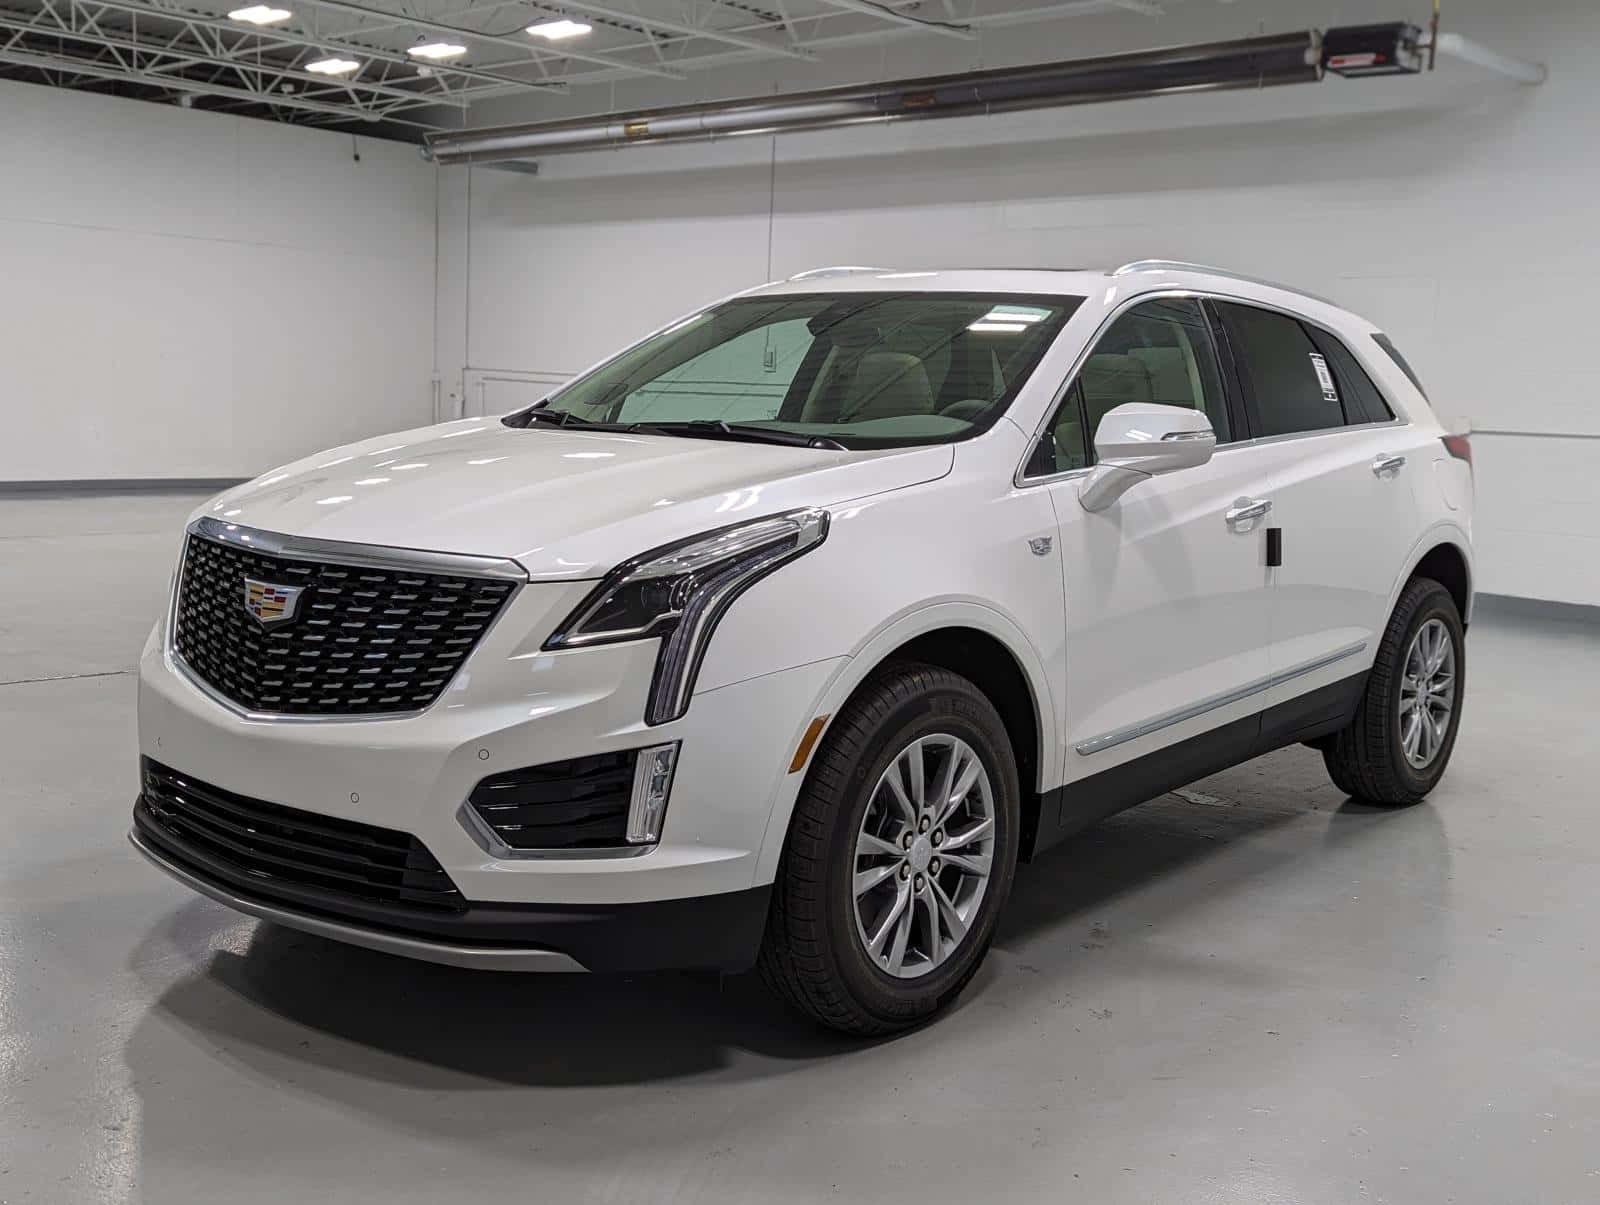 Sleek and Luxurious Cadillac XT5 on the Road Wallpaper